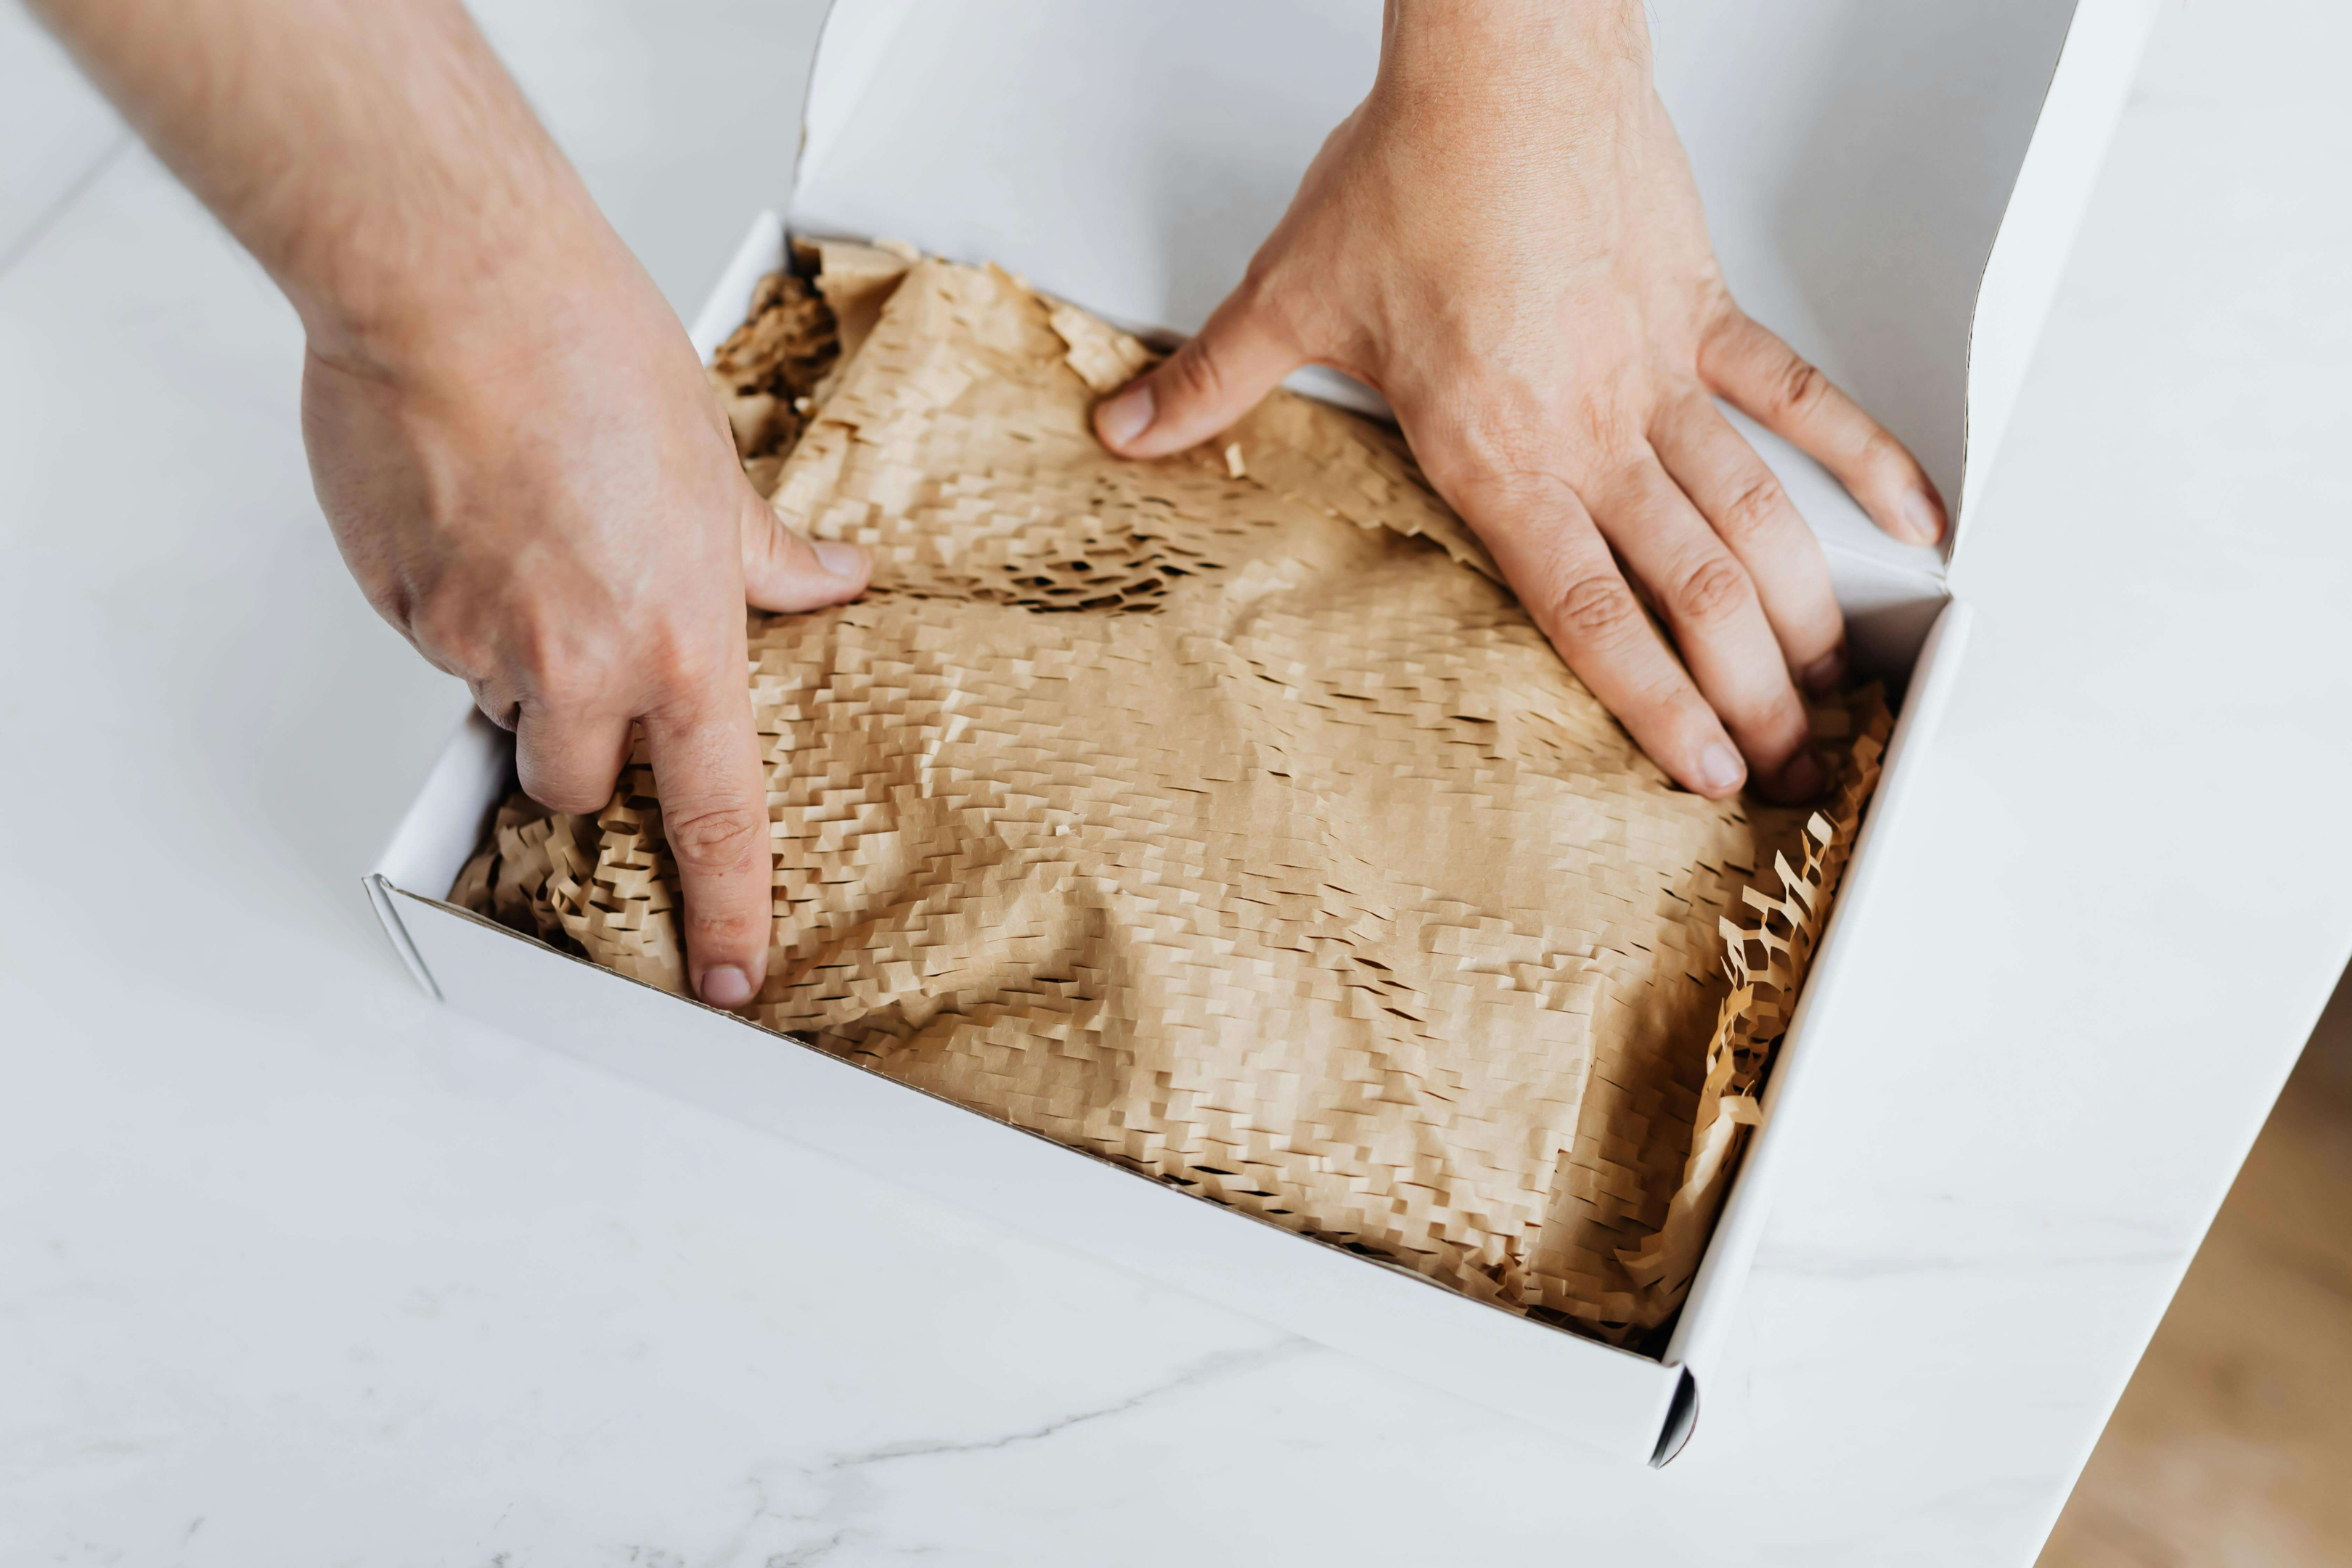 Hands arranging protective wood shavings in a white gift box on a marble countertop.